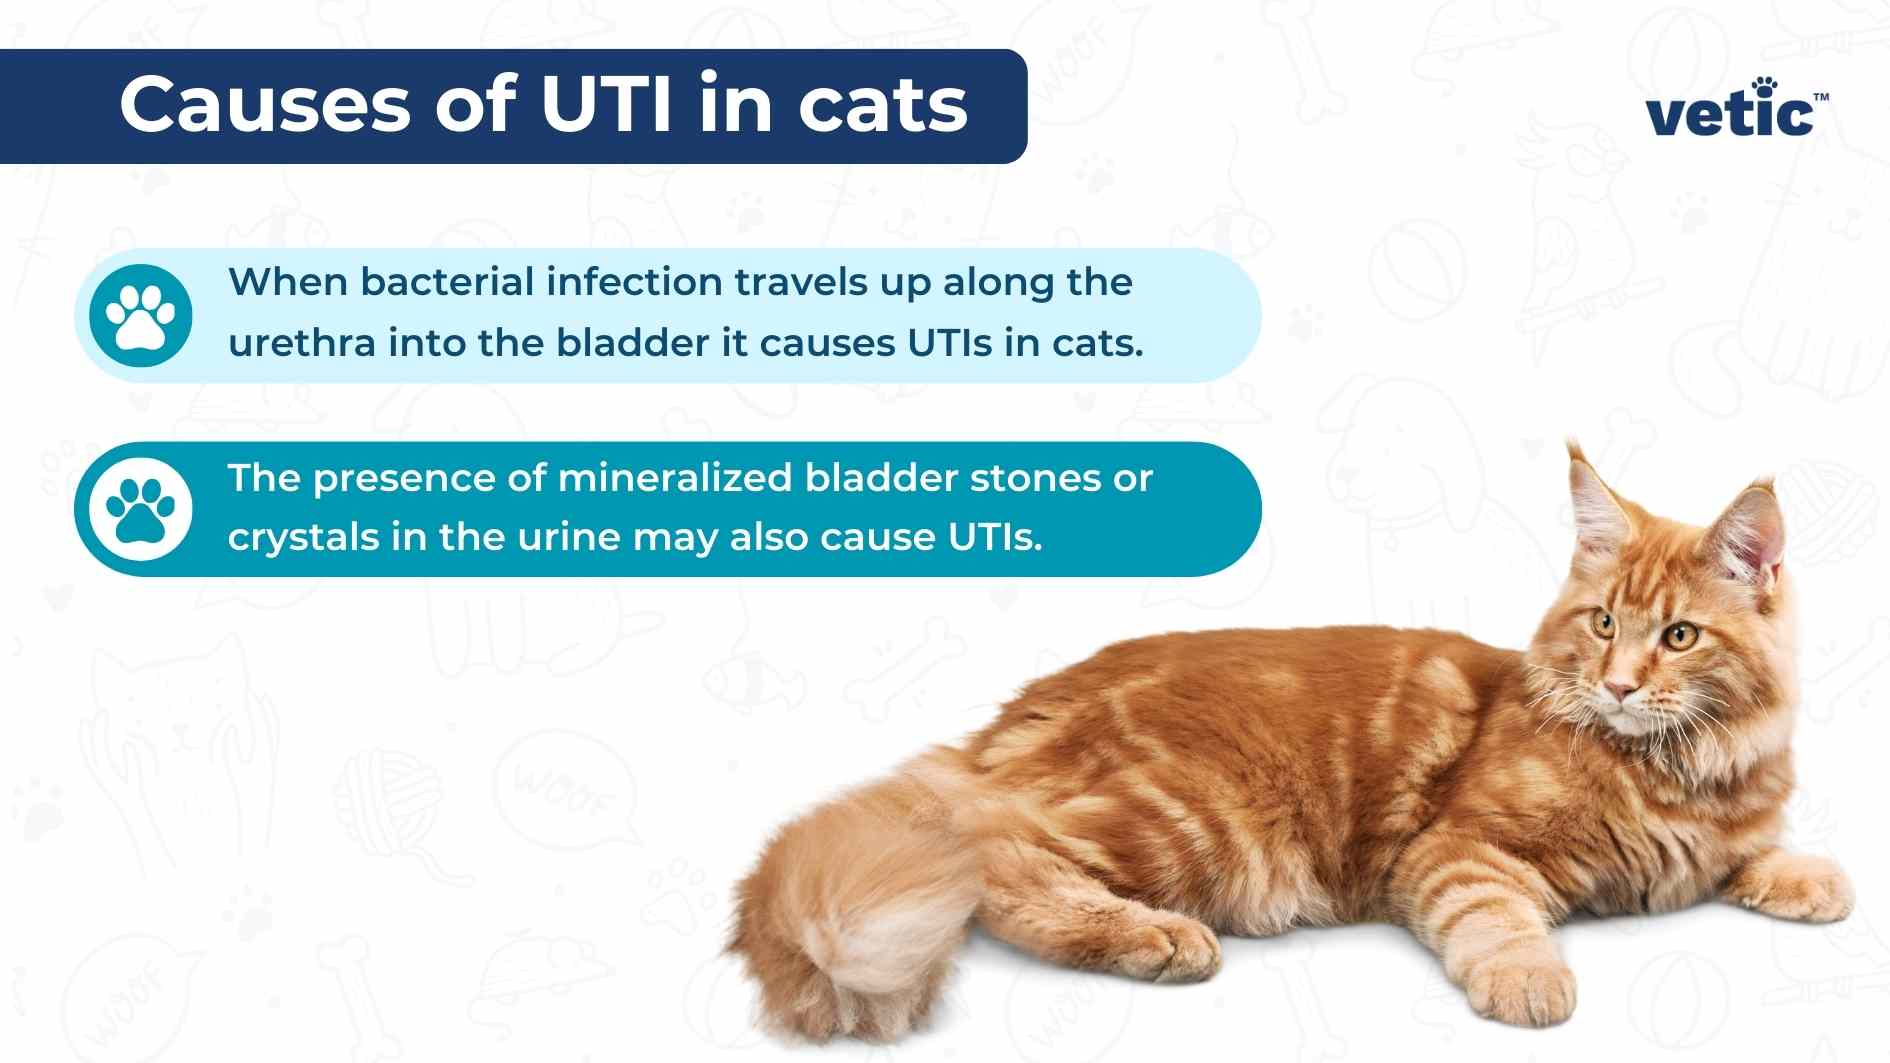 Infographic on the causes of UTI in cats by vetic. the causes include - When bacterial infection travels up along the urethra into the bladder it causes UTIs in cats. The presence of mineralized bladder stones or crystals in the urine may also cause UTIs.